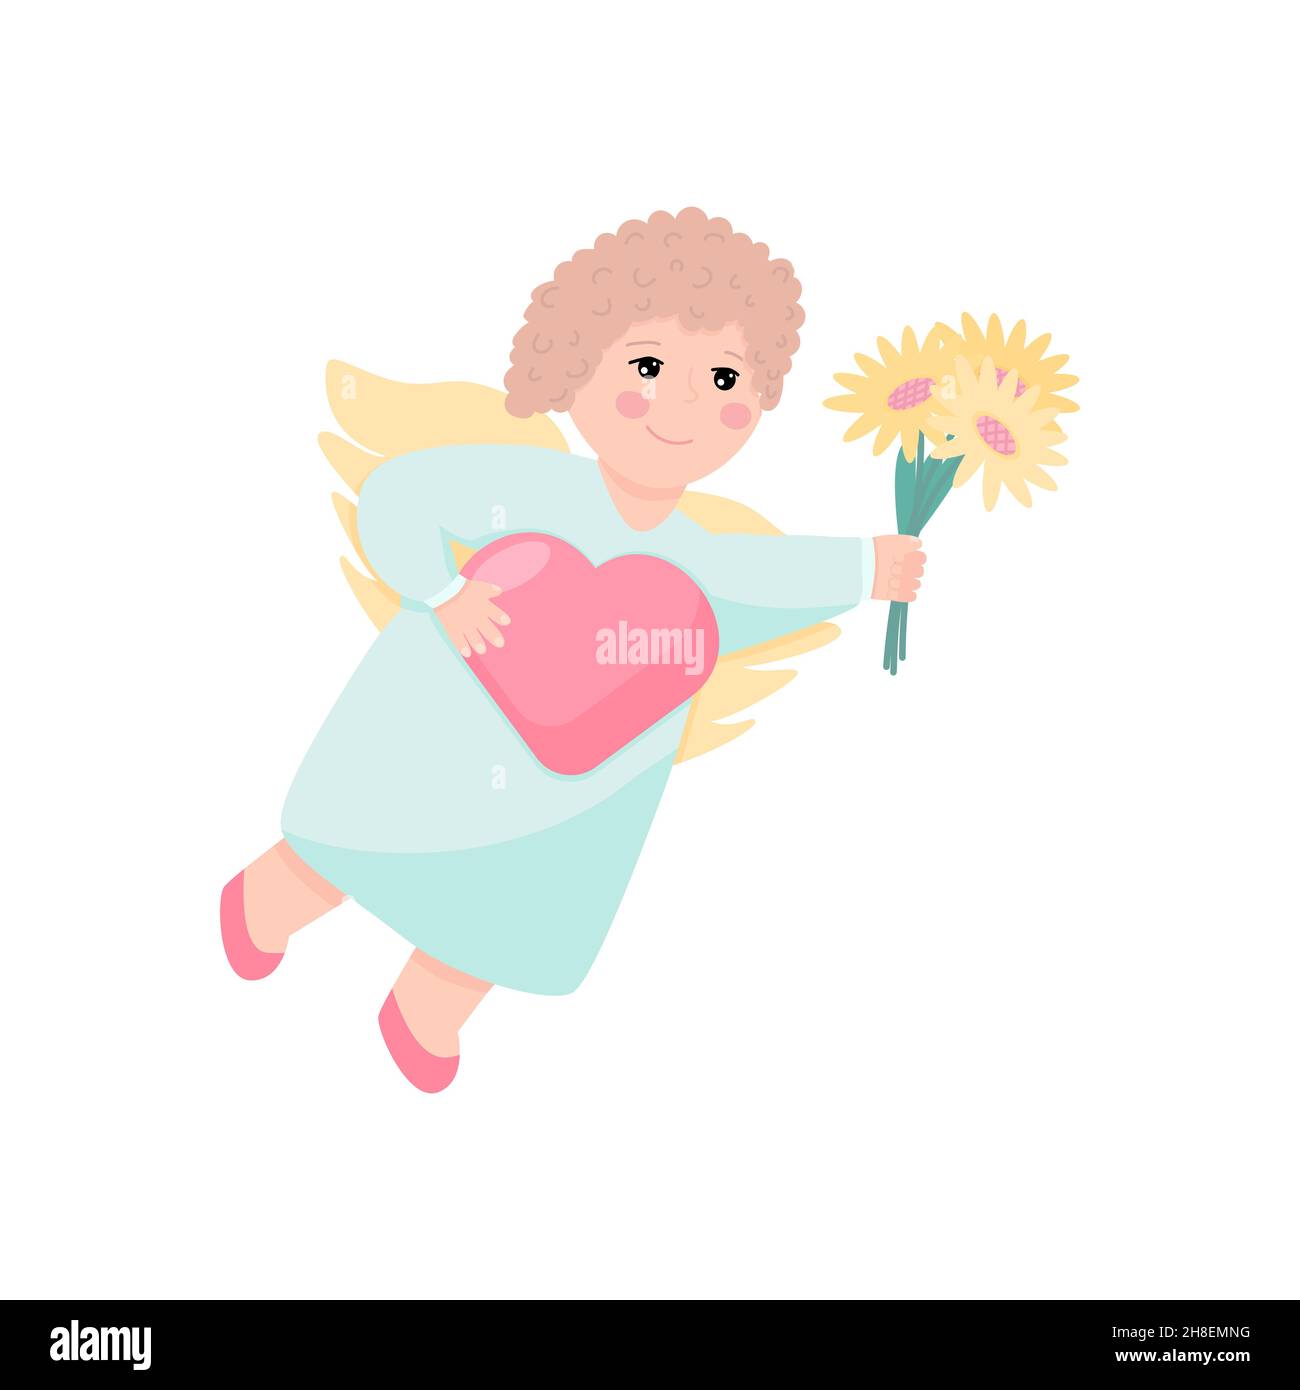 Adorable angel flat vector illustration. Funny cute child with wings cartoon characters. Happy girl holding heart and flowers Stock Vector